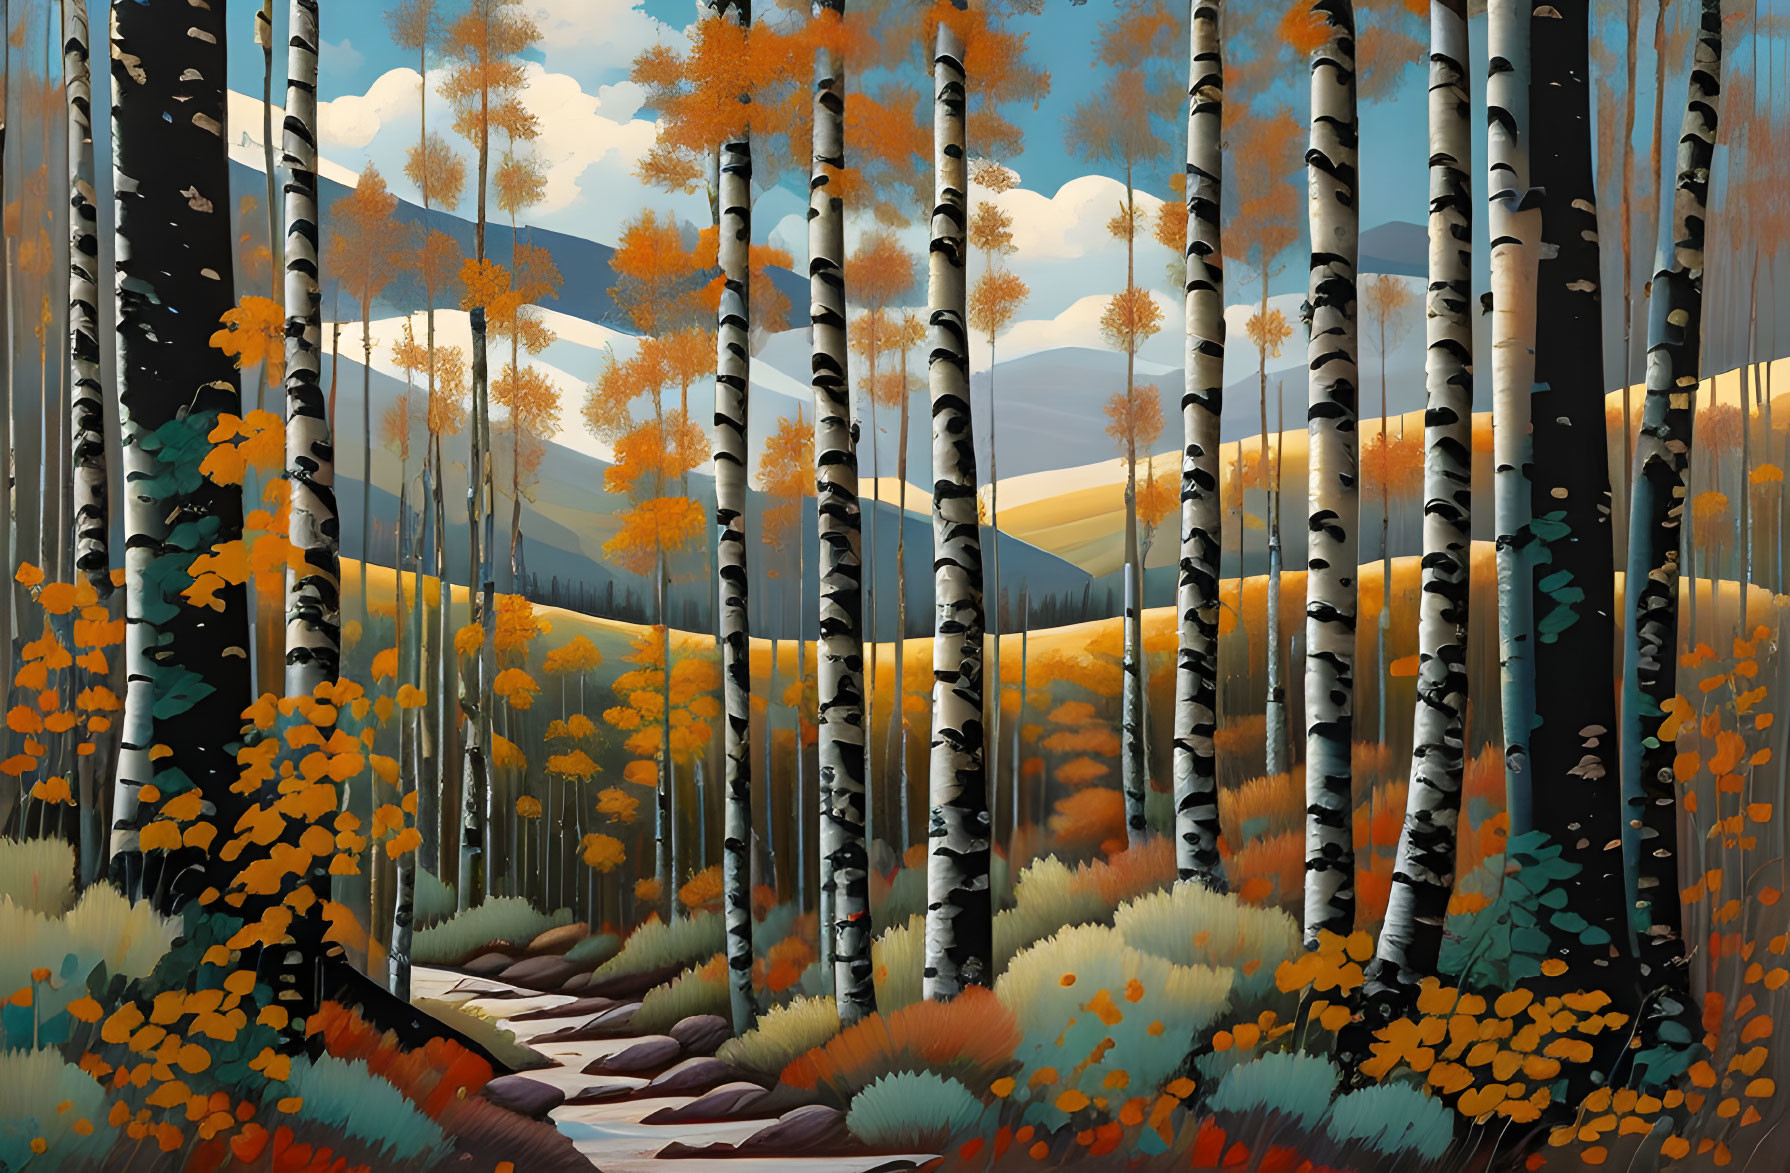 Stylized autumn forest with birch trees and golden leaves